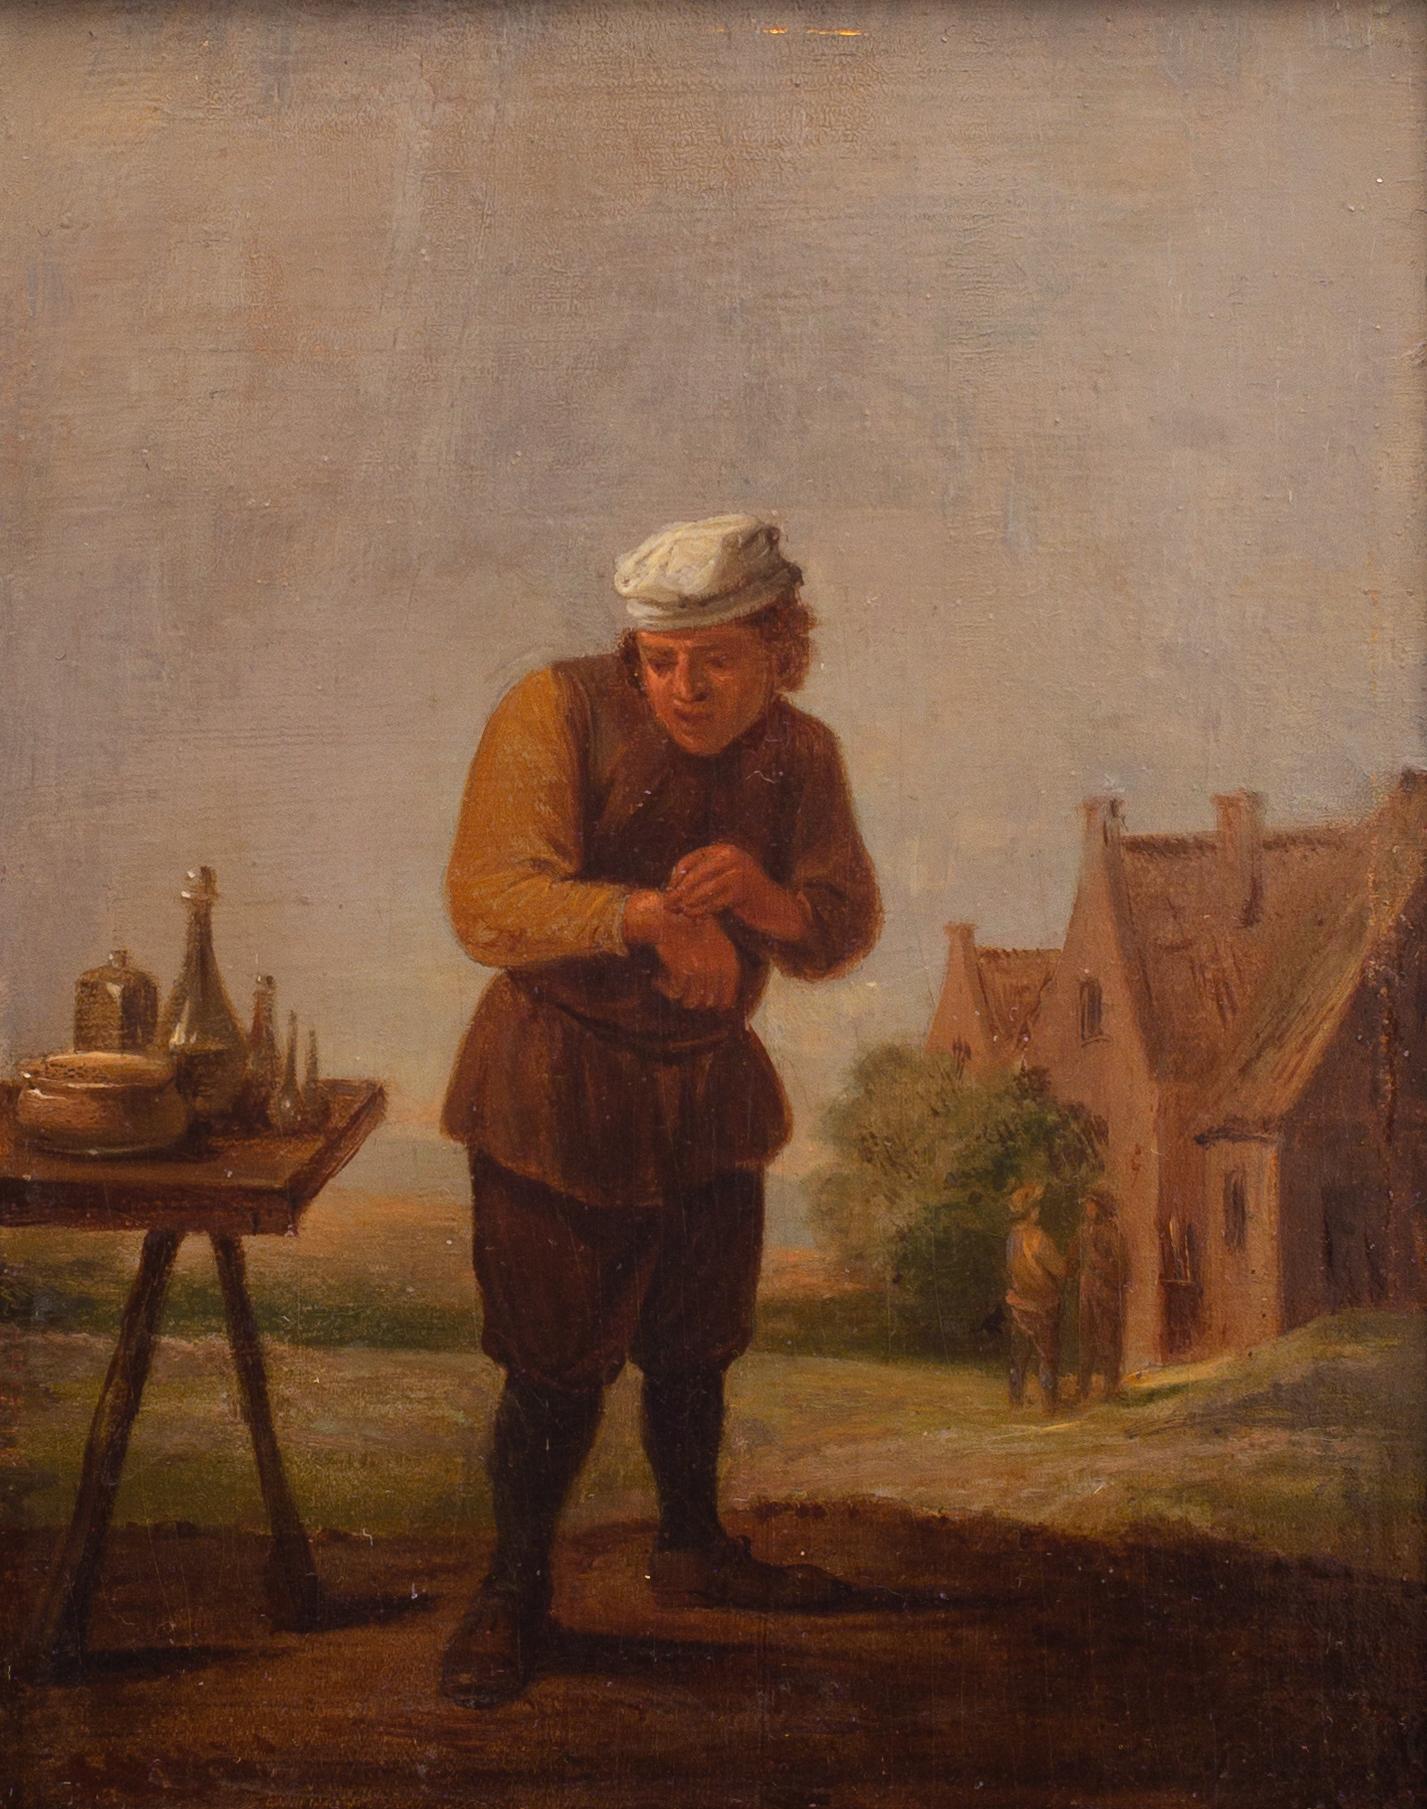 A Peasant Removing a Plaster: The Sense of Touch. By a Follower of David Teniers - Painting by David Teniers the Younger